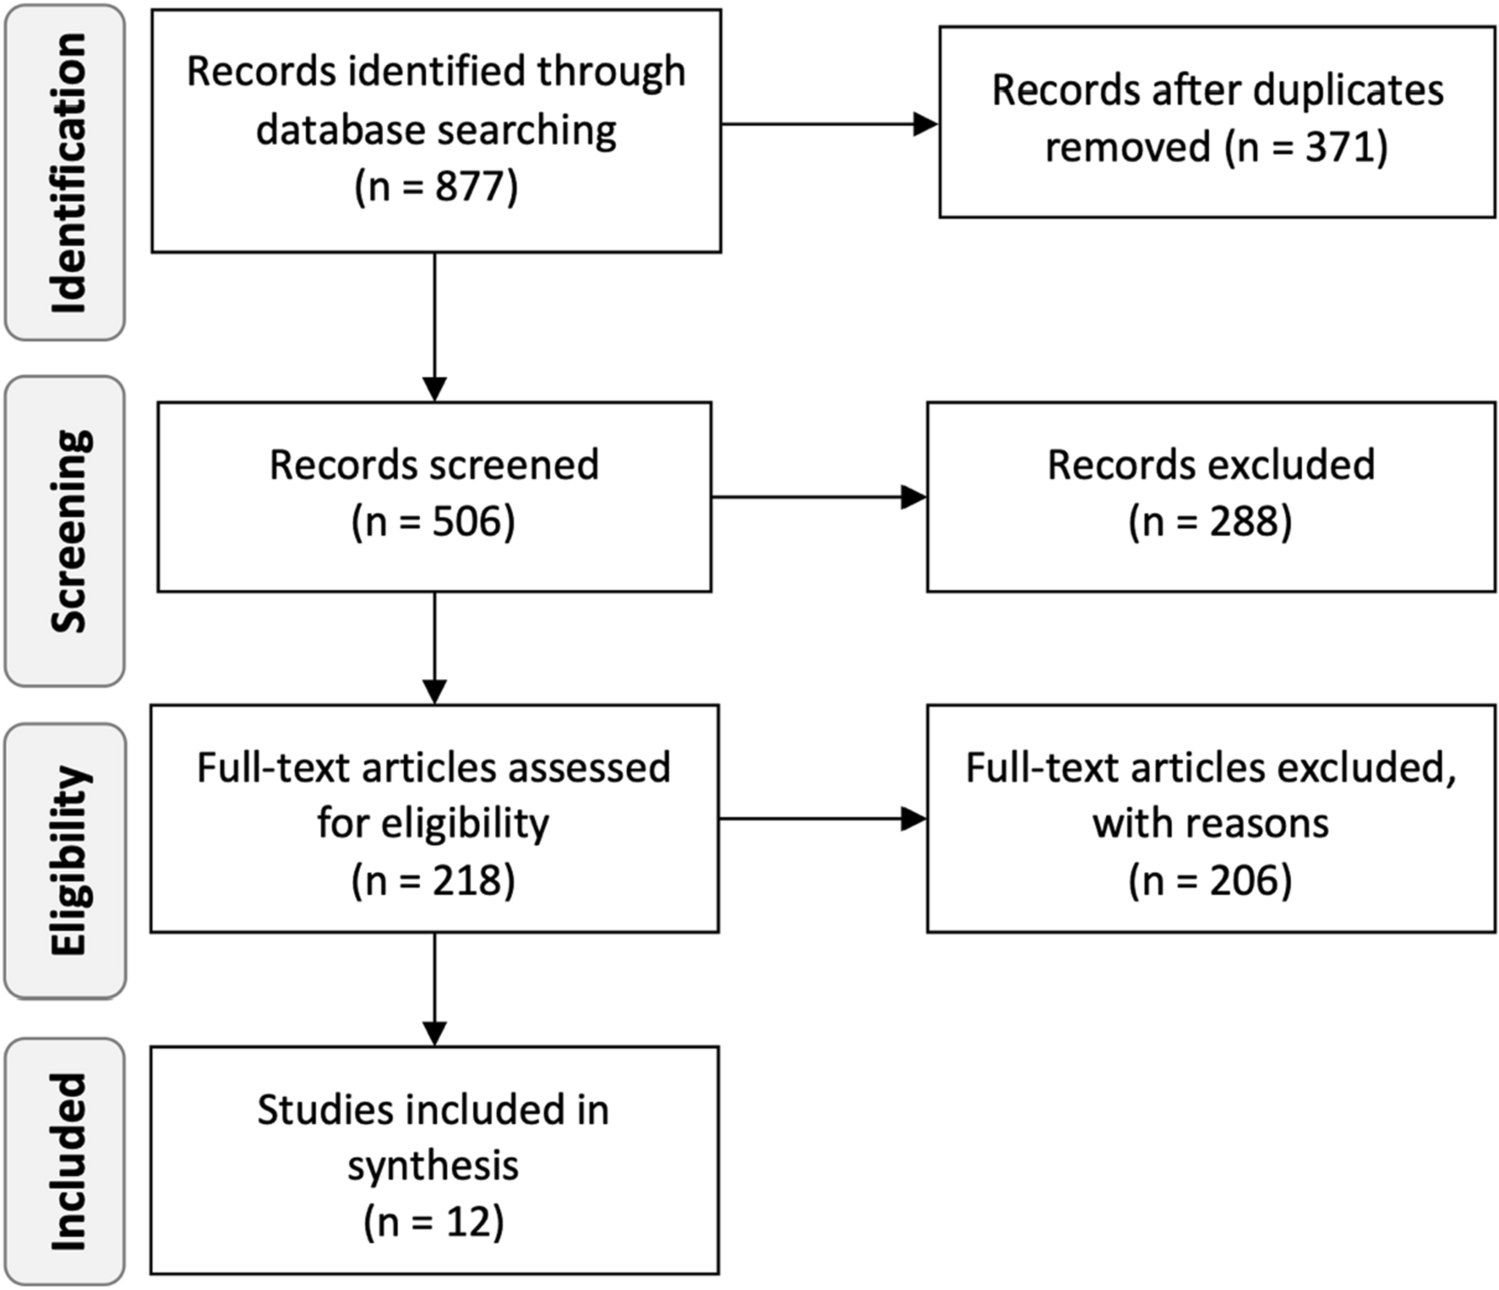 Dysphagia Prevalence in Progressive Supranuclear Palsy: A Systematic Review and Meta-Analysis